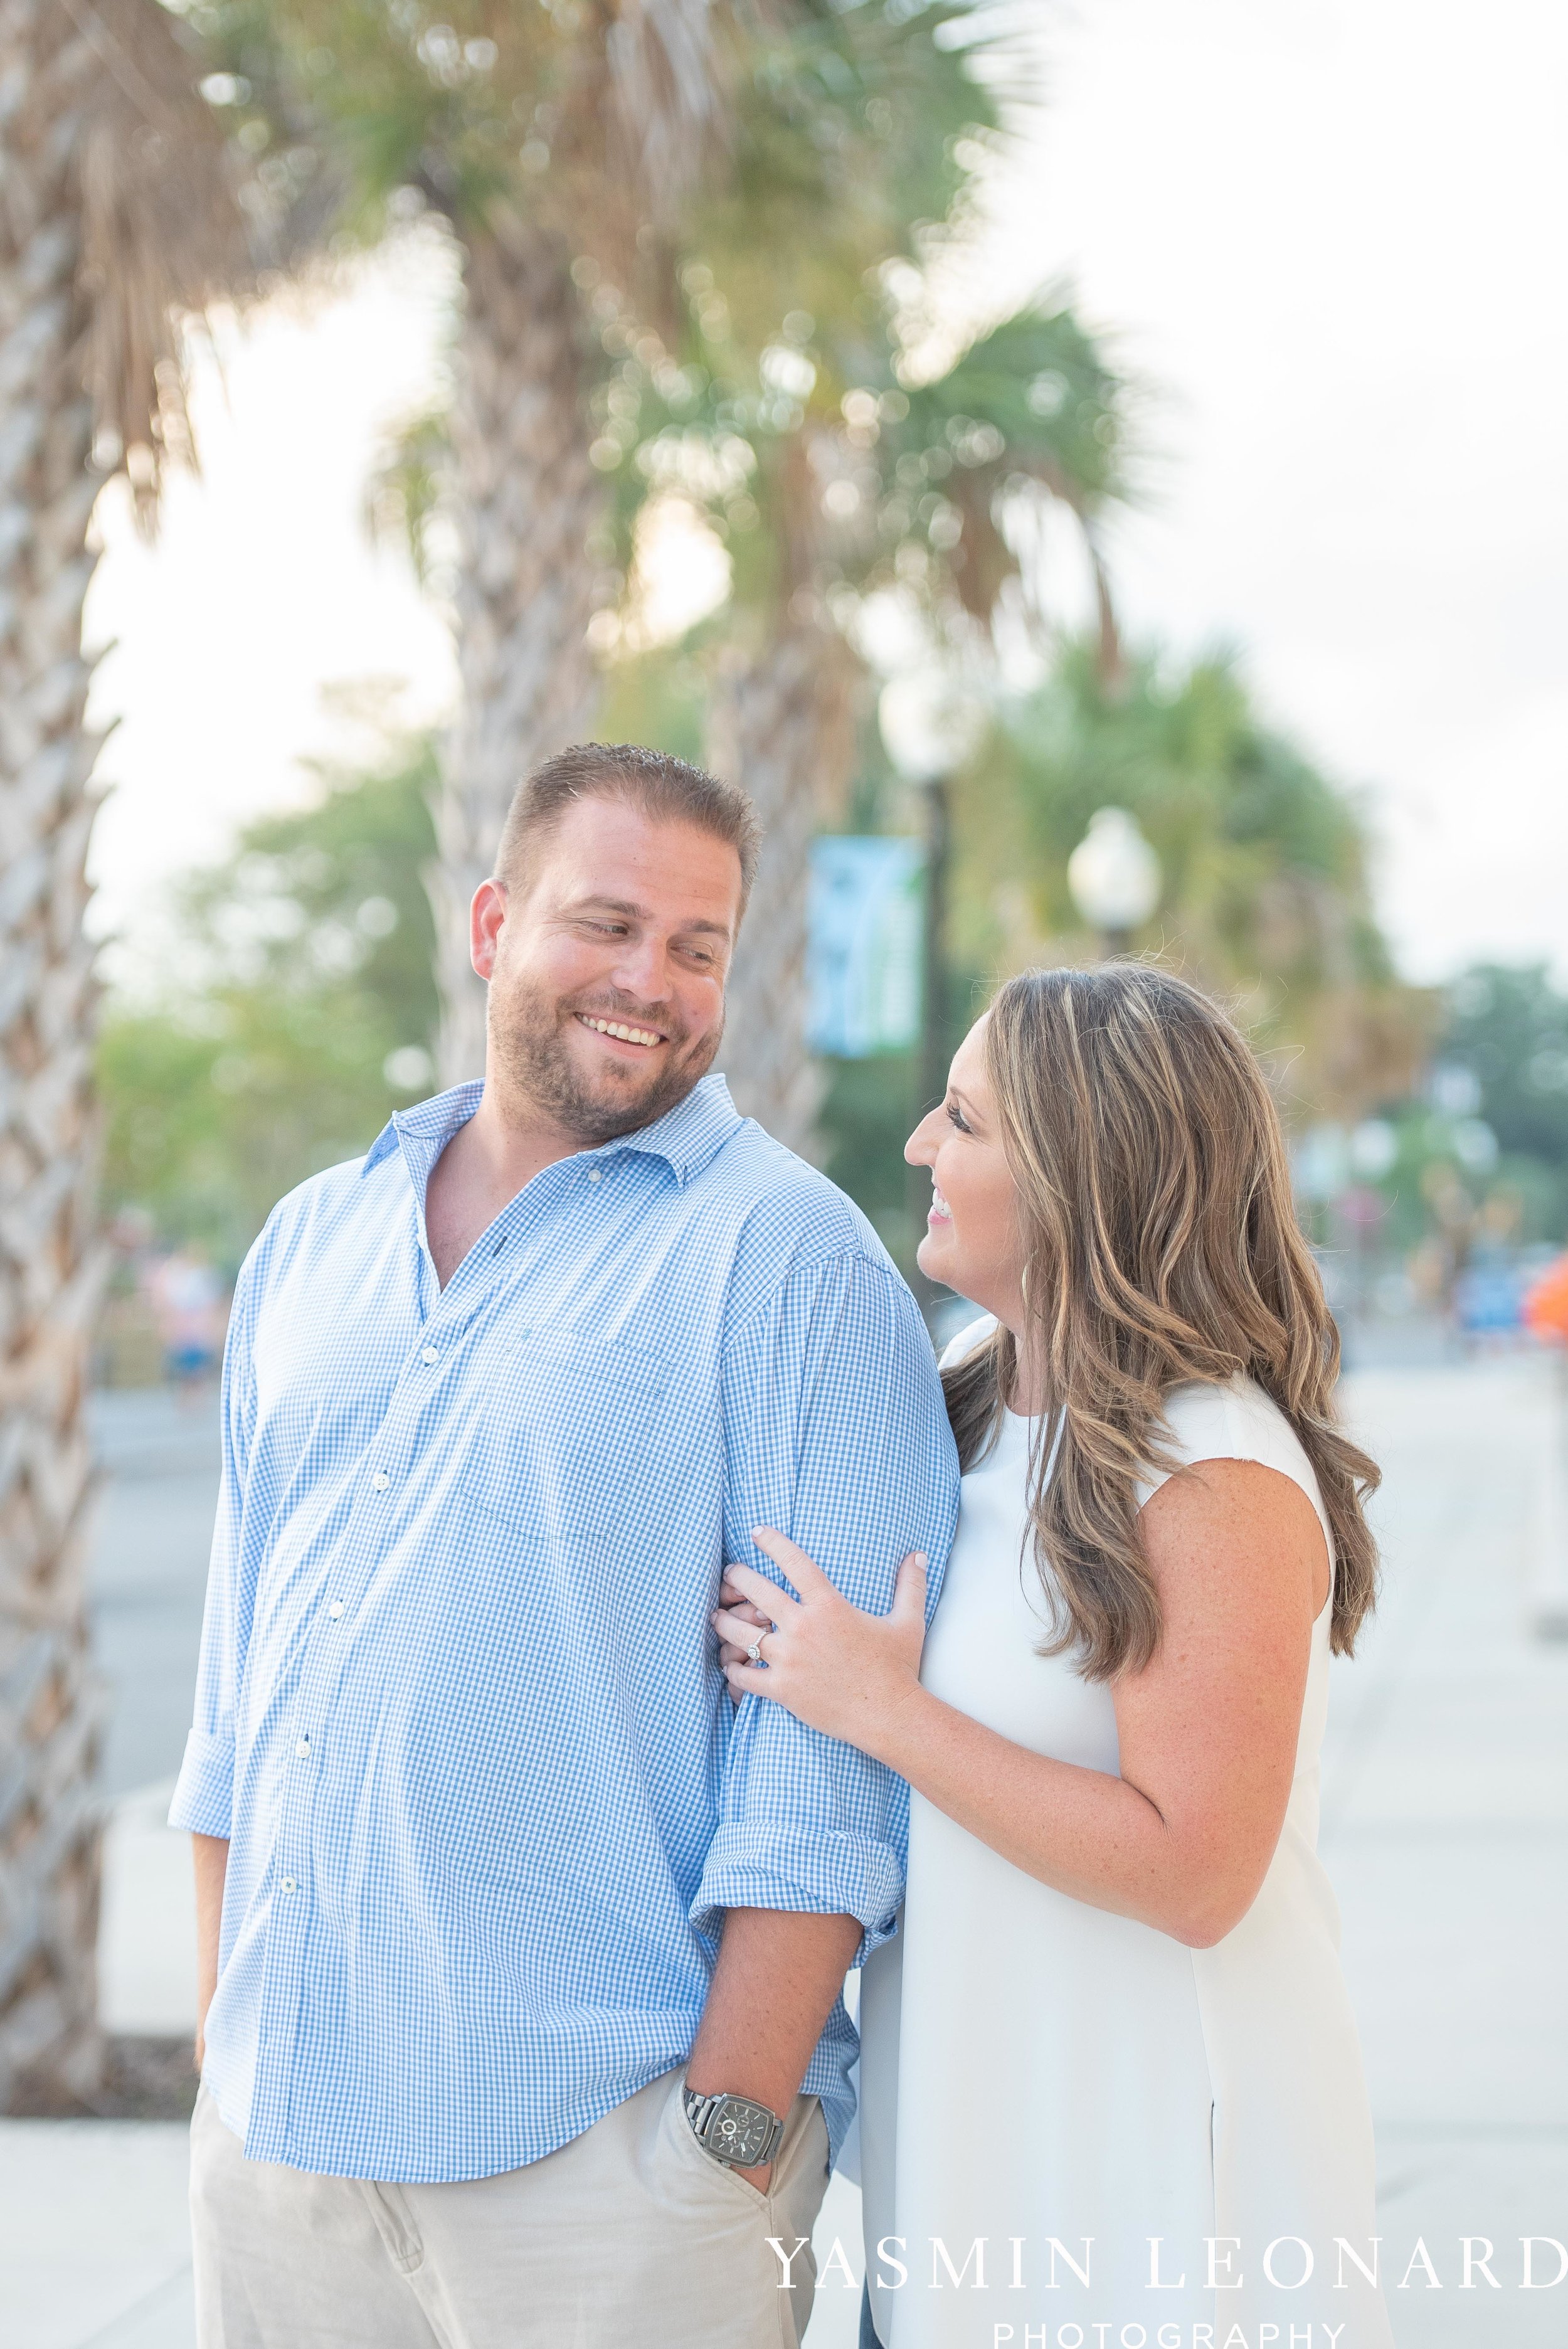 Wrightsville Beach Engagement Session - Wilmington Engagement Session - Downtown Wilmington Engagement Session - NC Weddings - Wilmington NC - Yasmin Leonard Photography-6.jpg